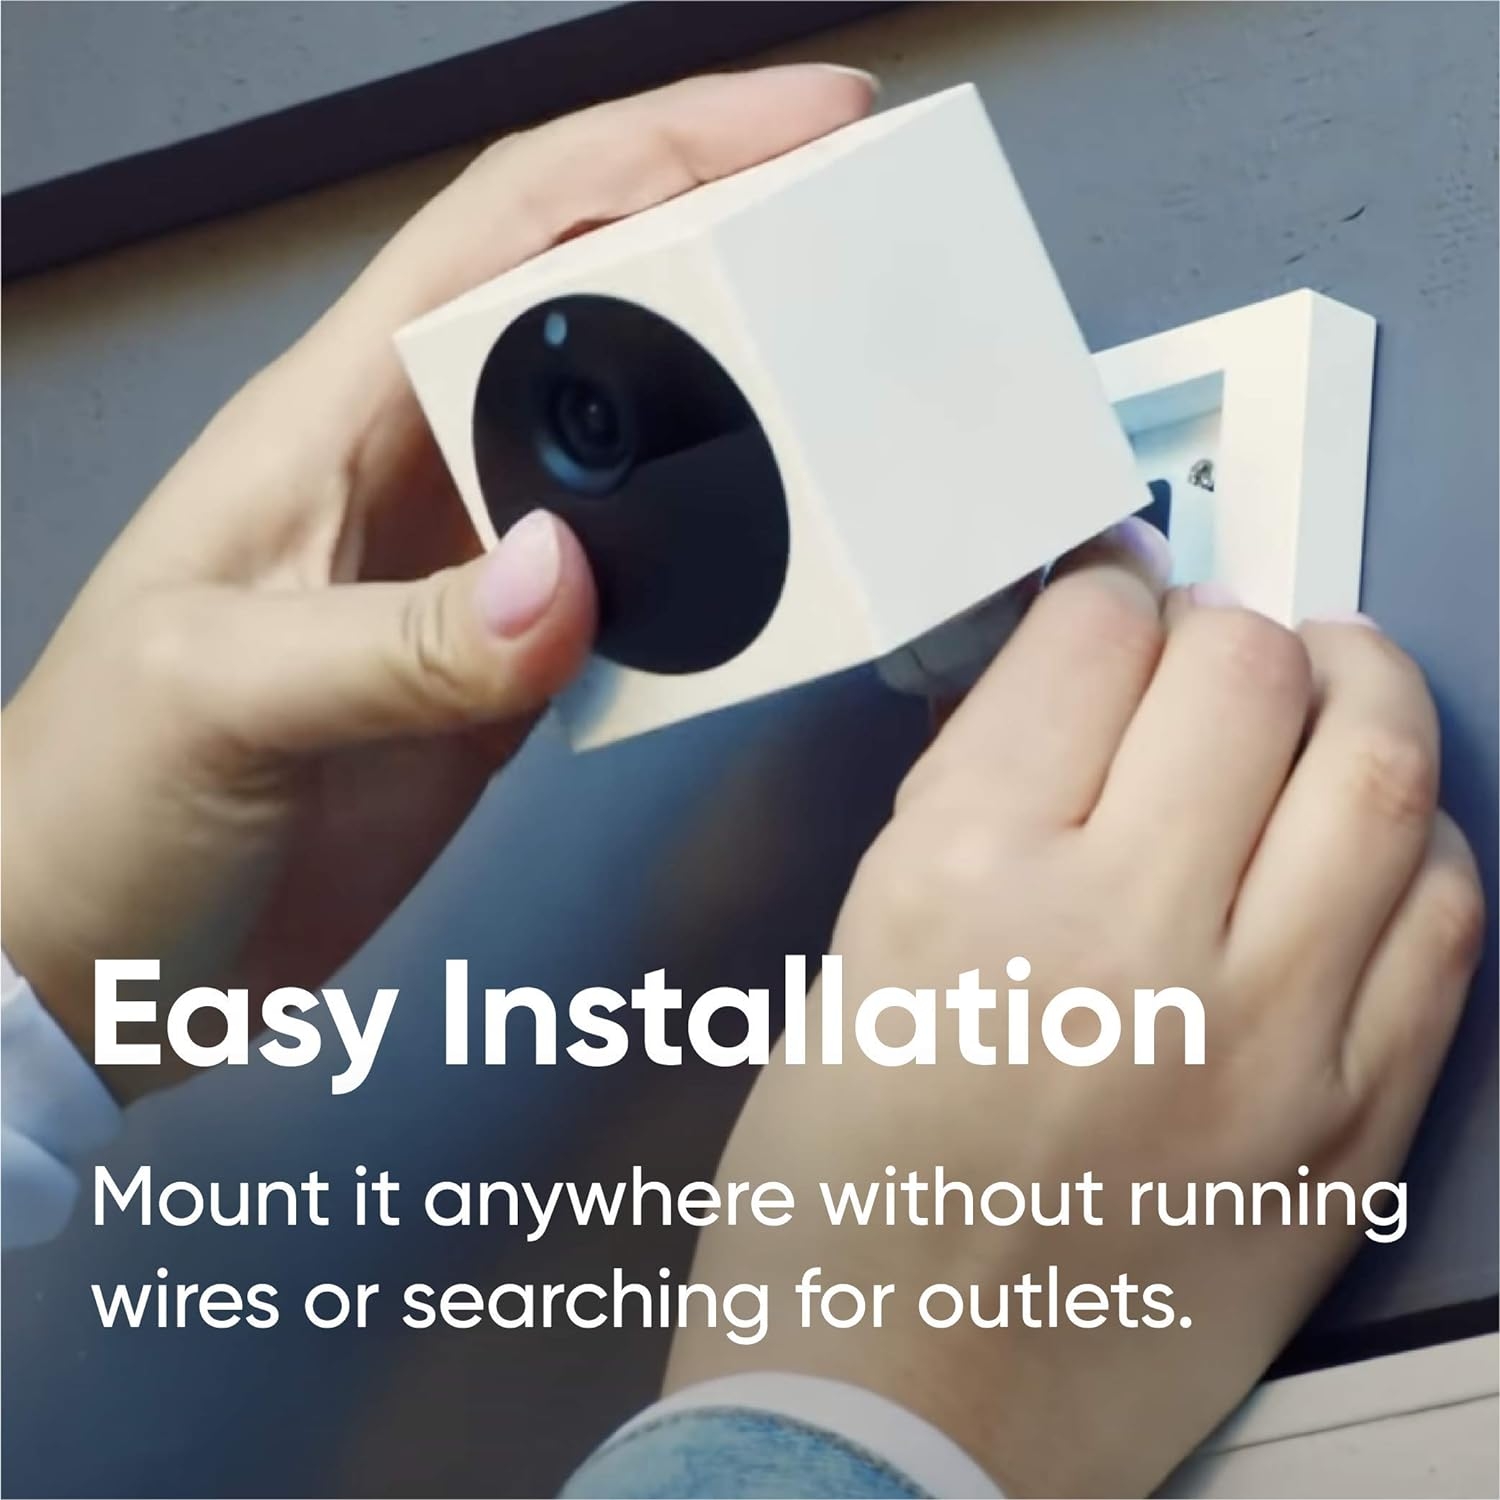 Wyze Cam Outdoor Security Camera Starter Bundle (Includes Base Station & 1 Camera), 1080p HD Indoor/Outdoor Wire-Free Smart Home Camera, Night Vision, 2-Way Audio, Works with Alexa & Google Assistant